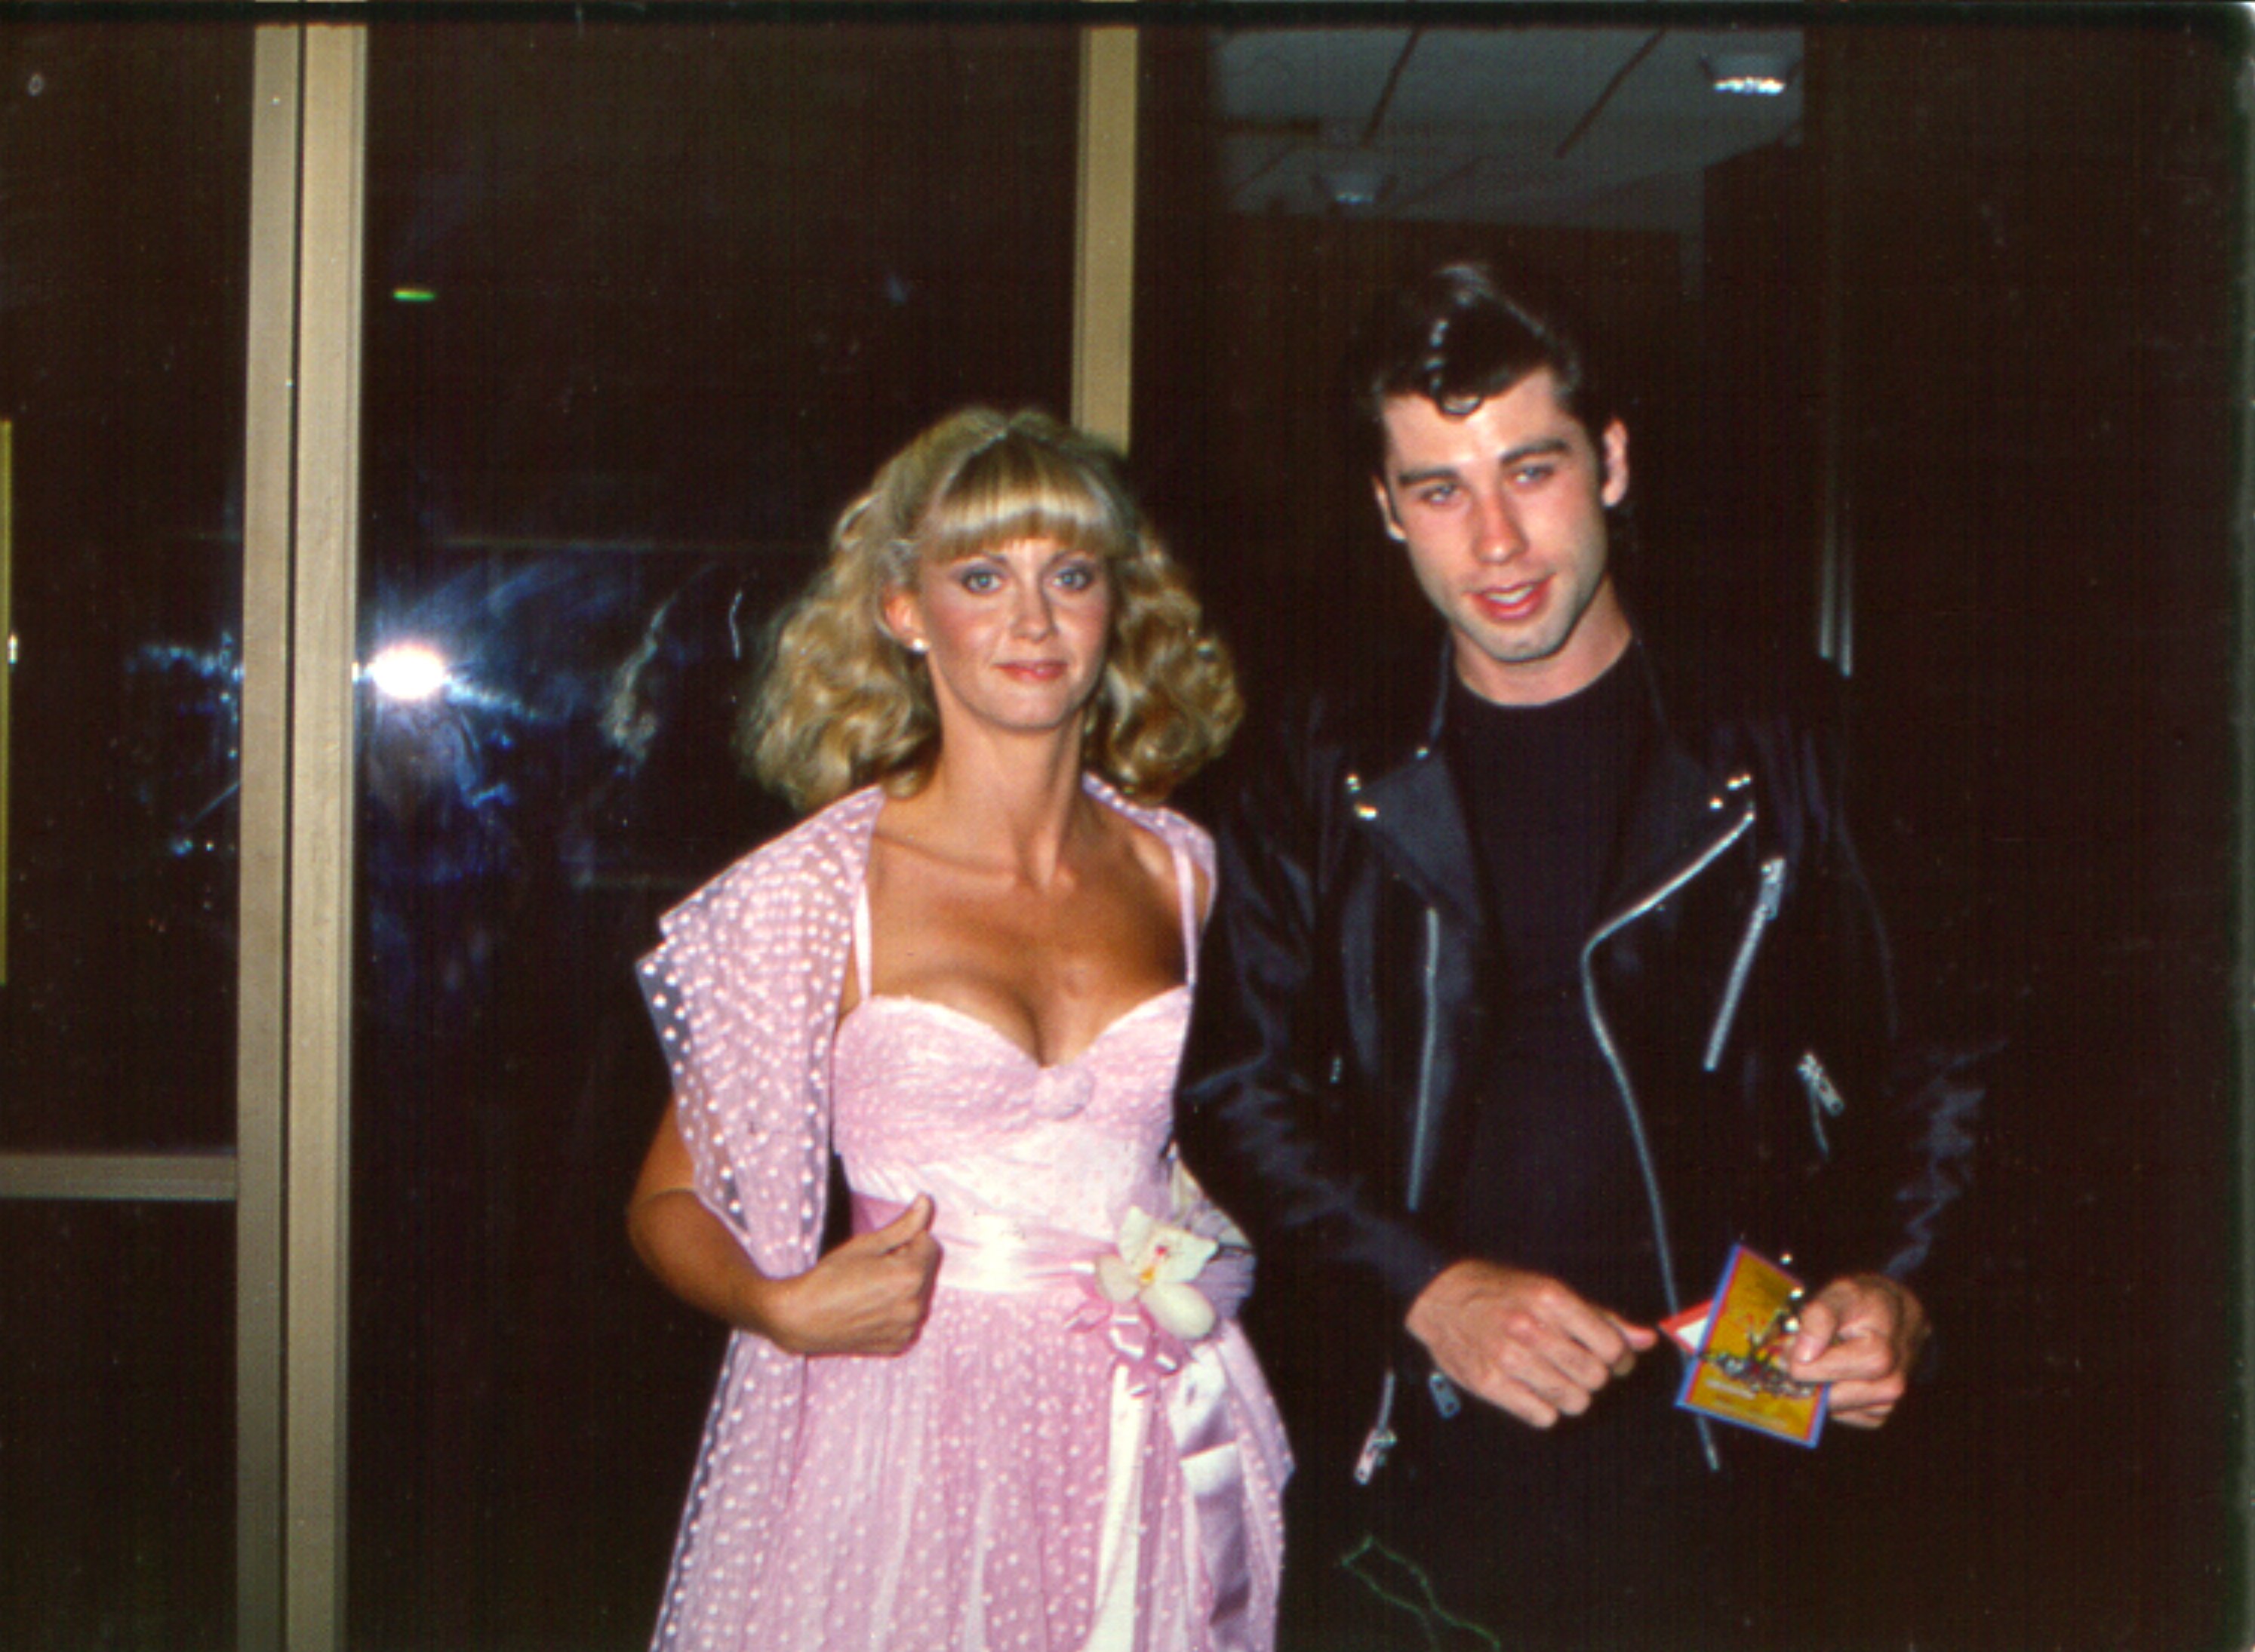 Olivia Newton-John and John Travolta at a "Grease" premier event, 1978. | Source: Getty Images 